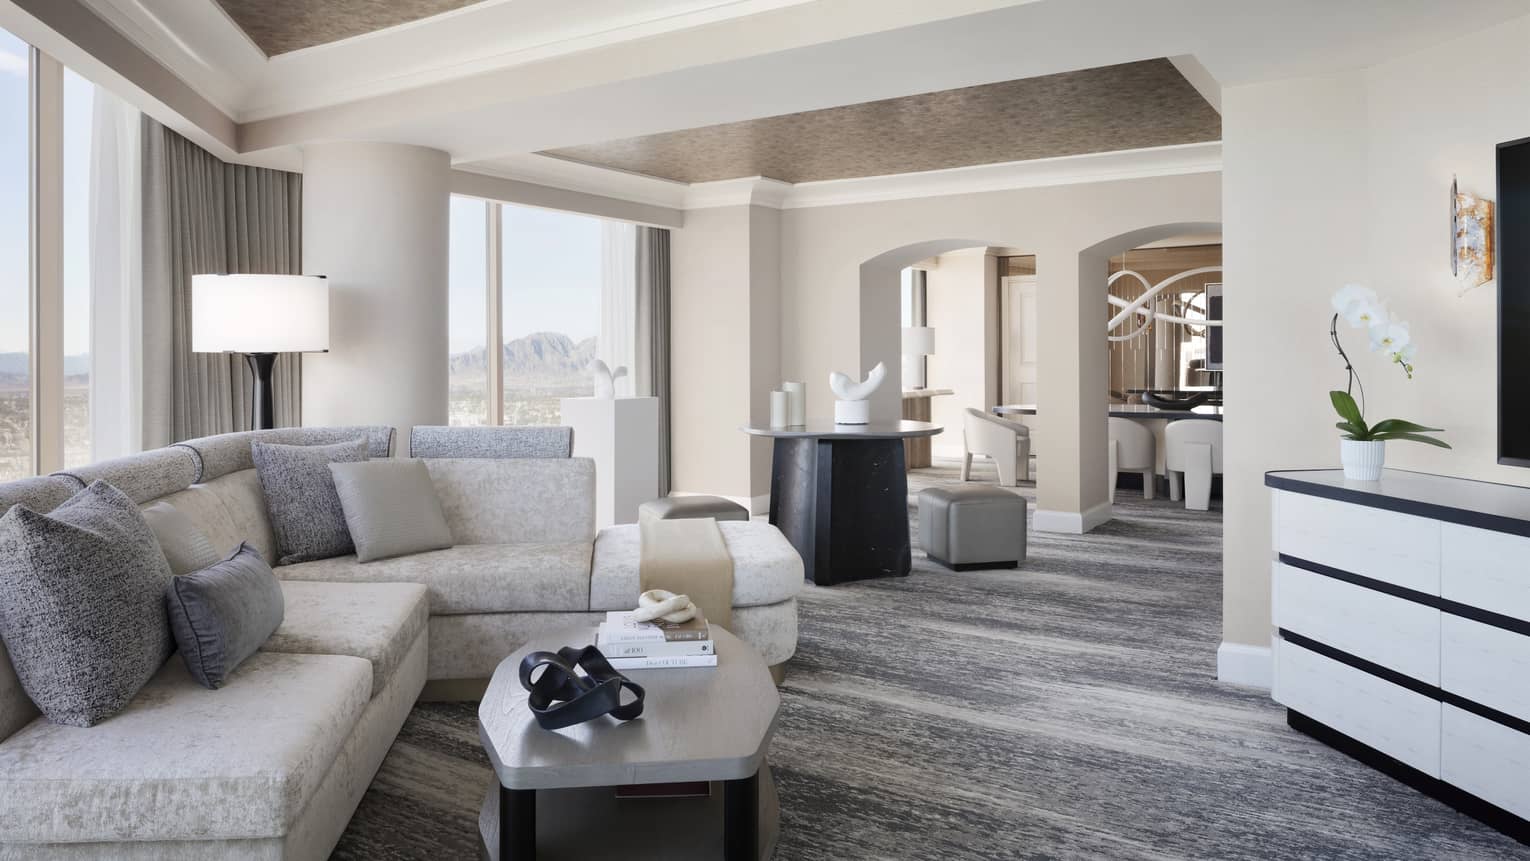 Large living room of Presidential Suite, designed with cream and grey tones, at Four Seasons Hotel Las Vegas